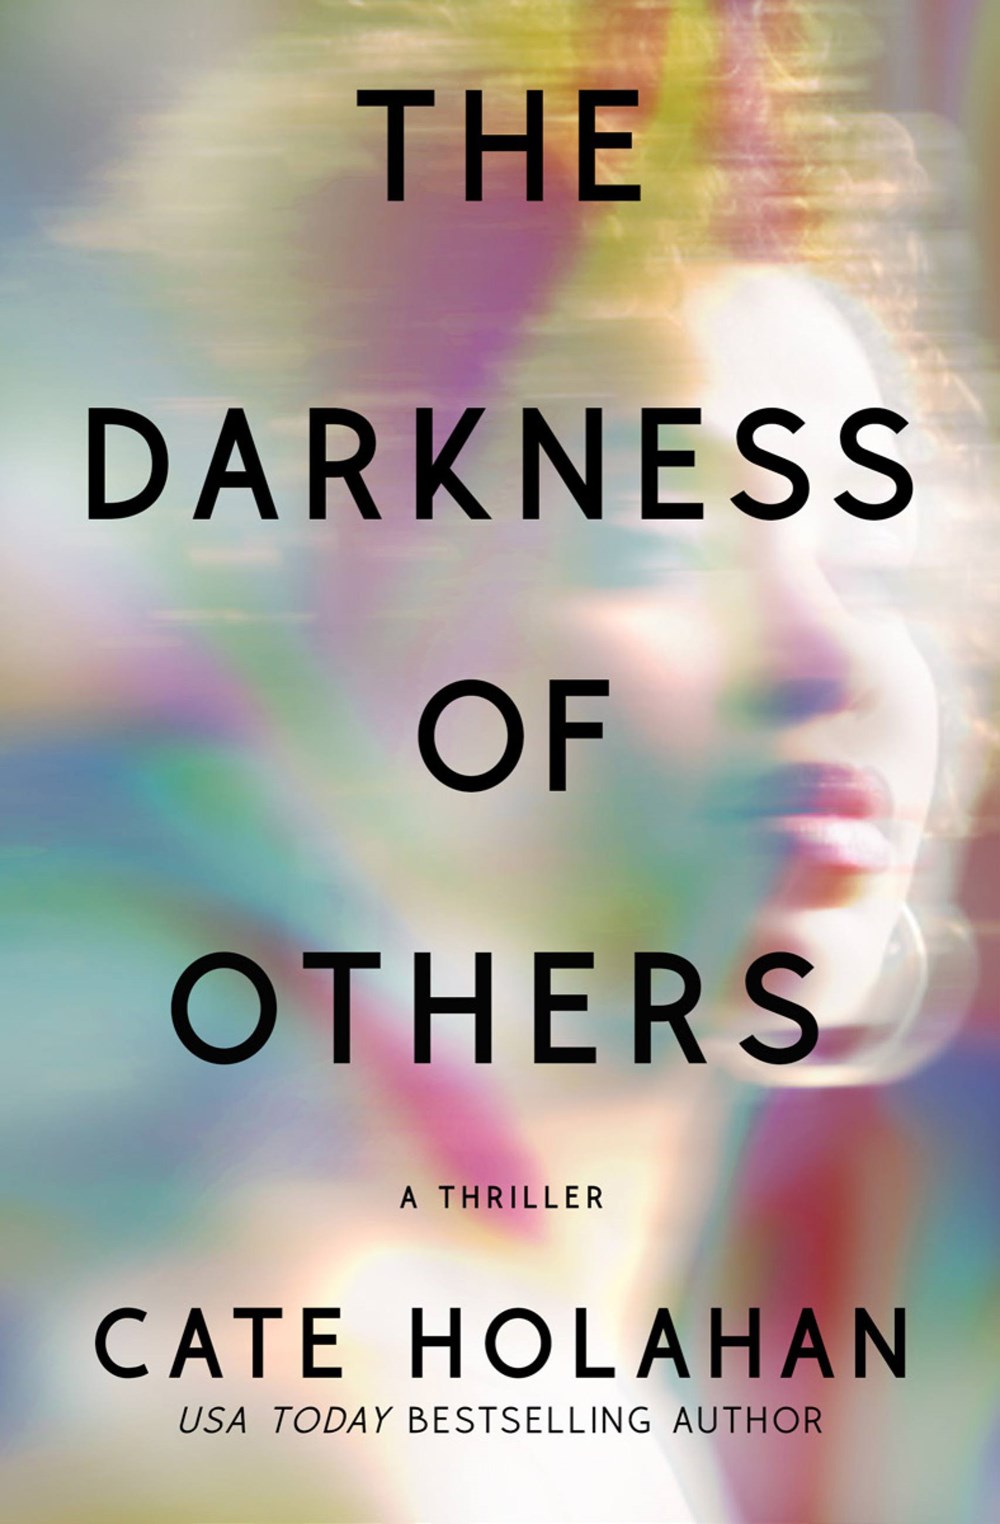 the darkness of others book cover